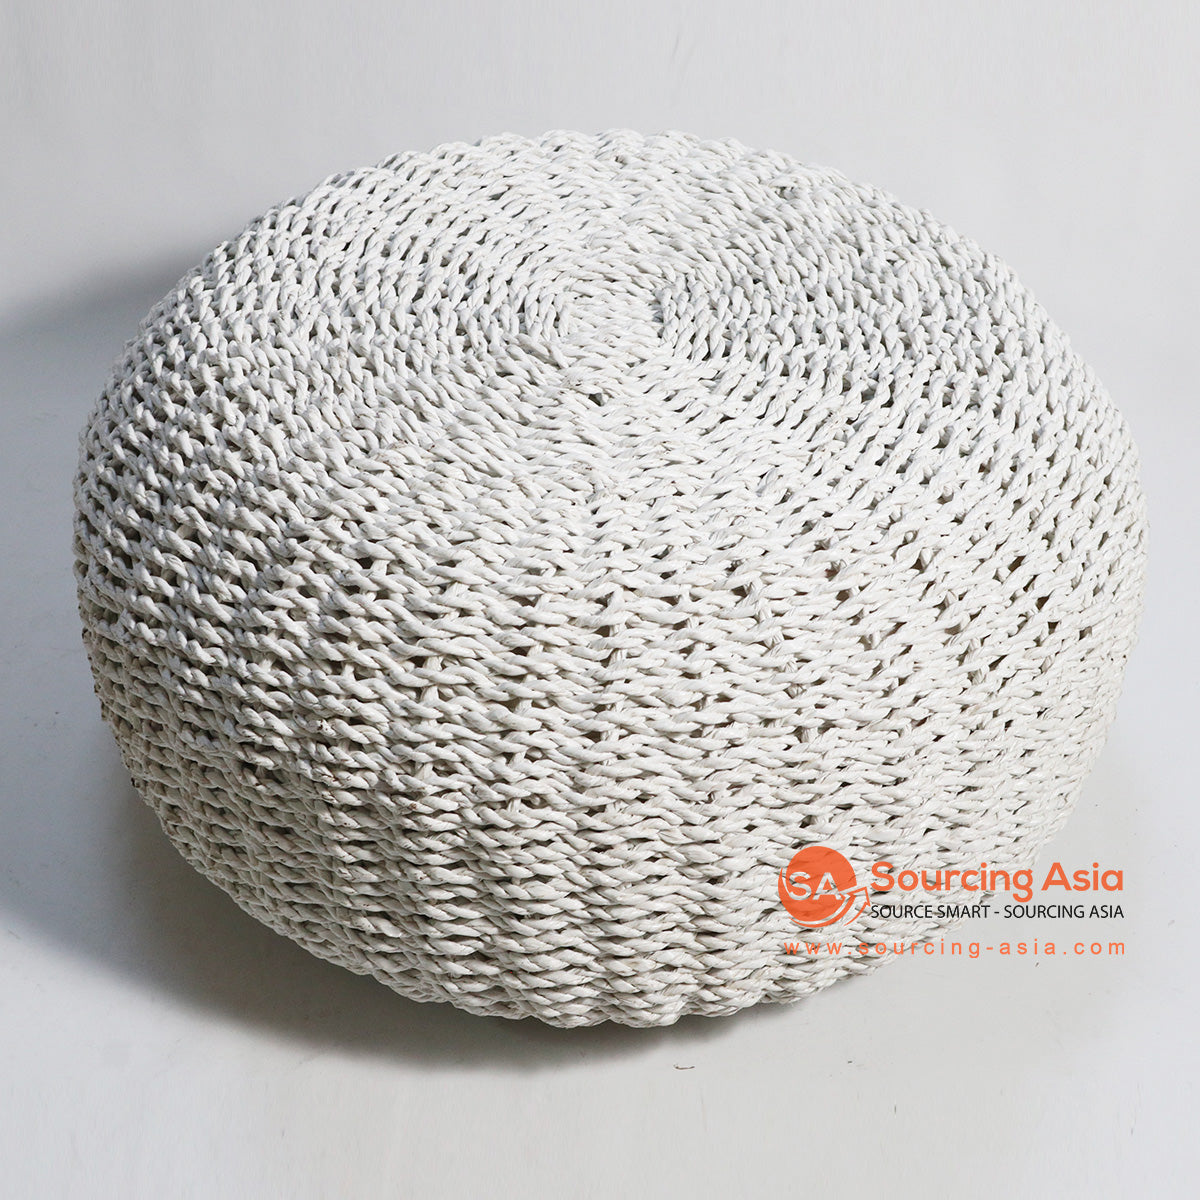 HBSC142 WHITE SYNTHETIC ROUND FOOT POUFFE